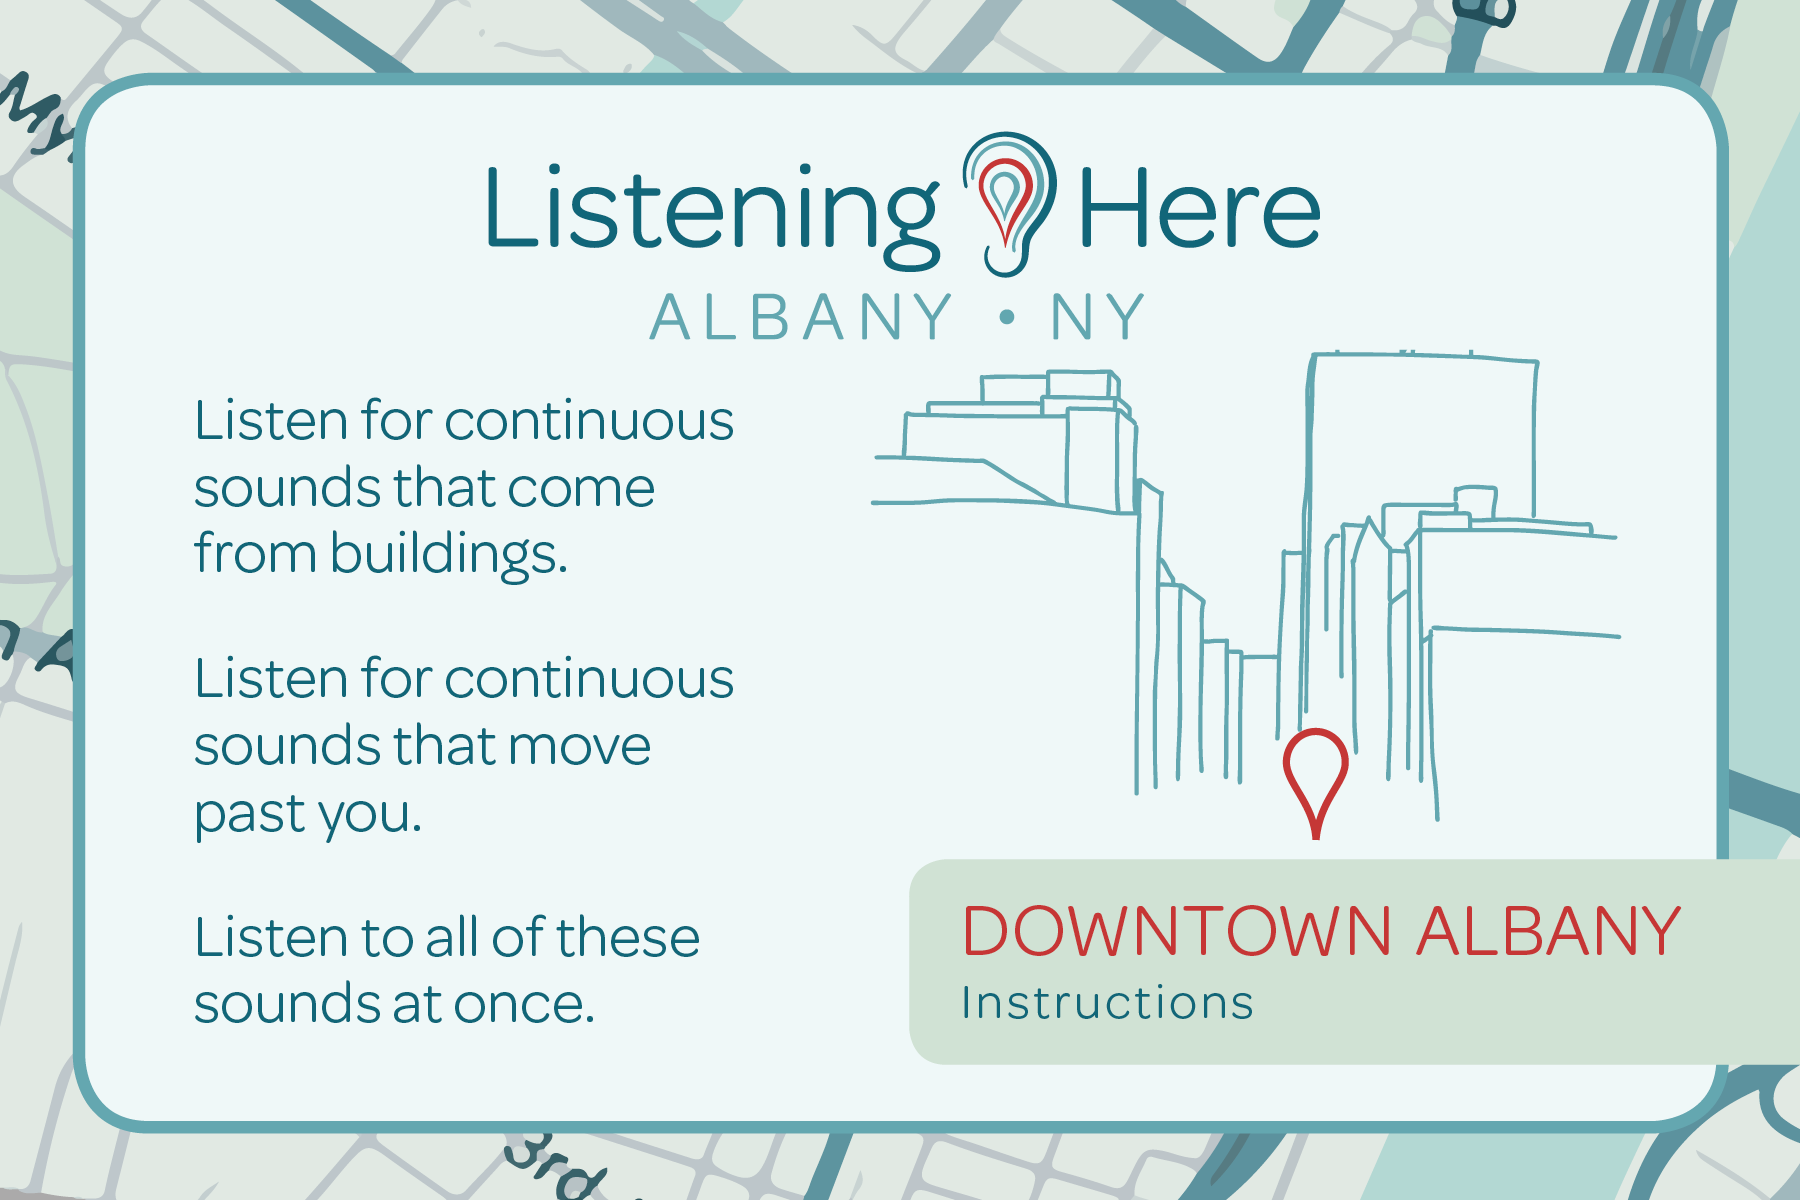 Listening HERE: Albany NY.    Downtown Albany: Instructions.    Listen for sounds that come from buildings.    Listen for continuous sounds that move past you.     Listen to all of these sounds at once.